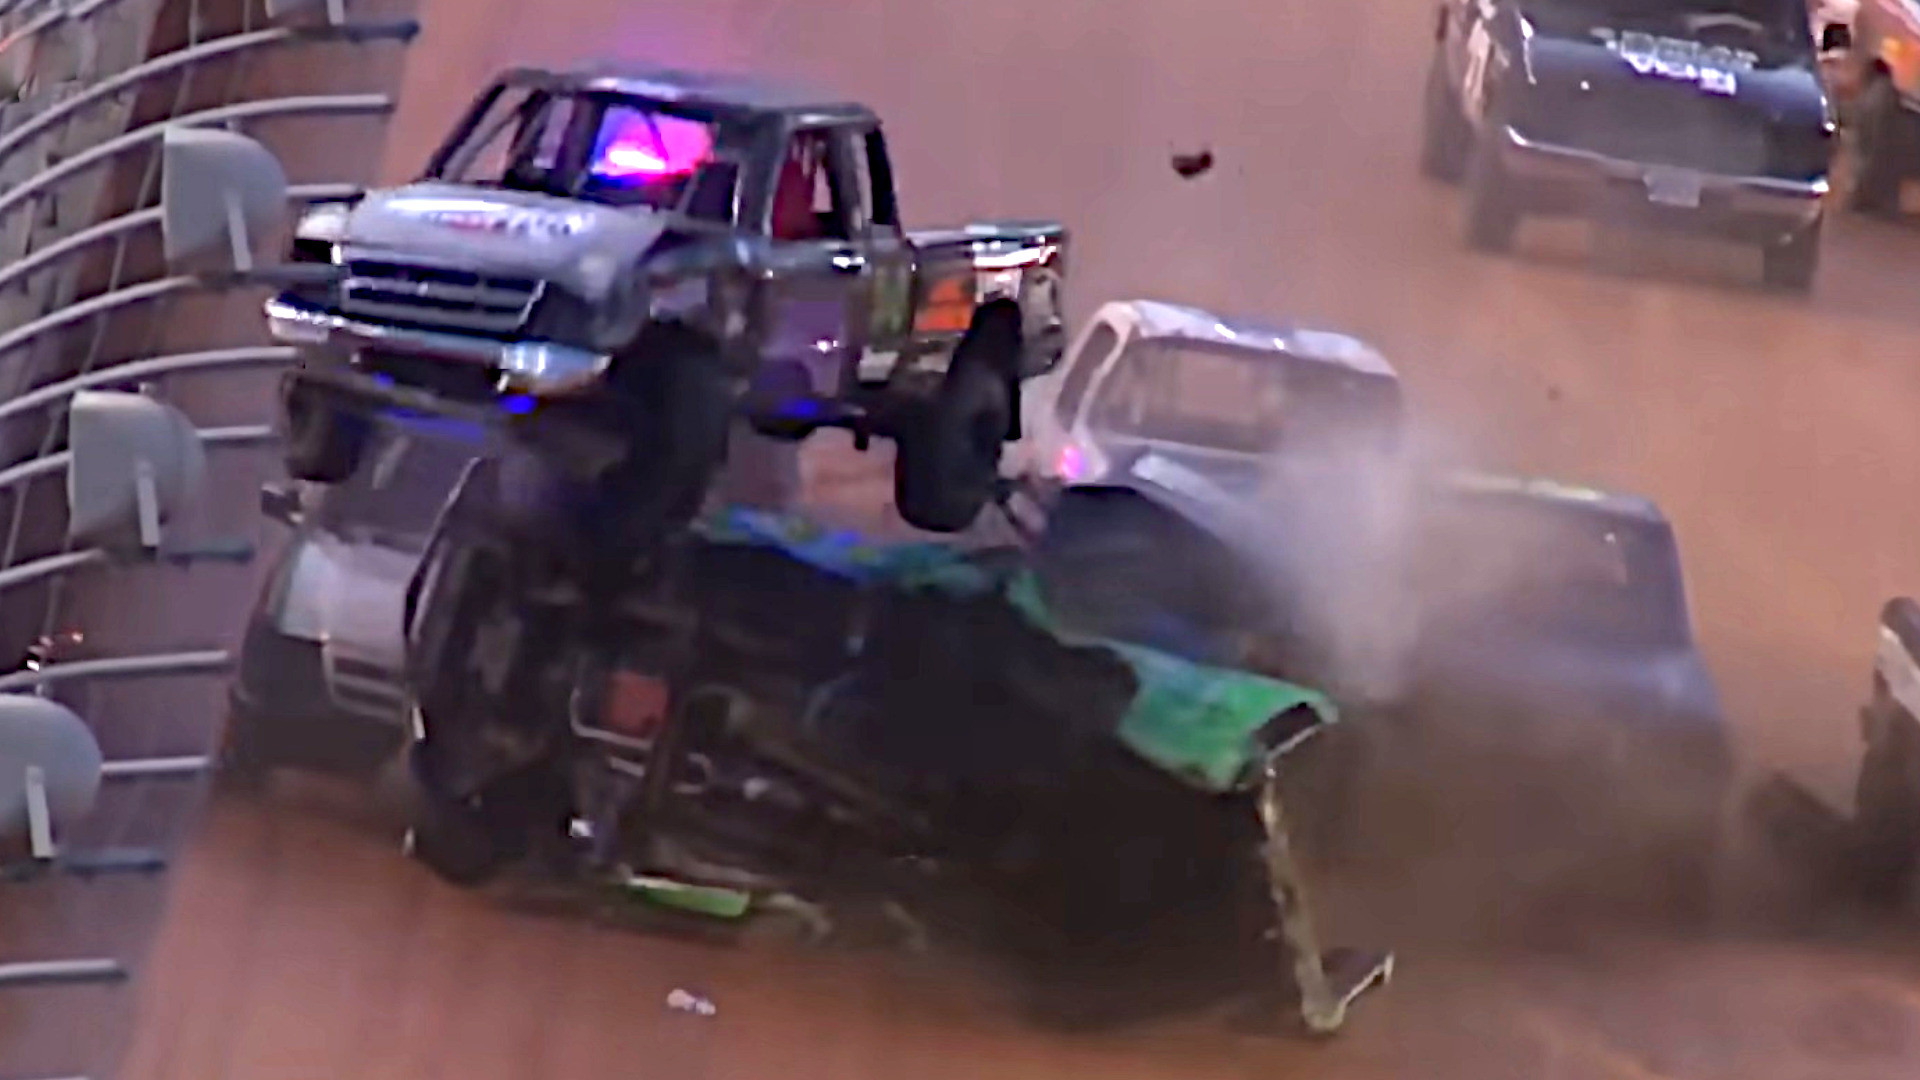 30 Ford Rangers Racing on Bristol Dirt Is a Recipe for Spectacular Crashes